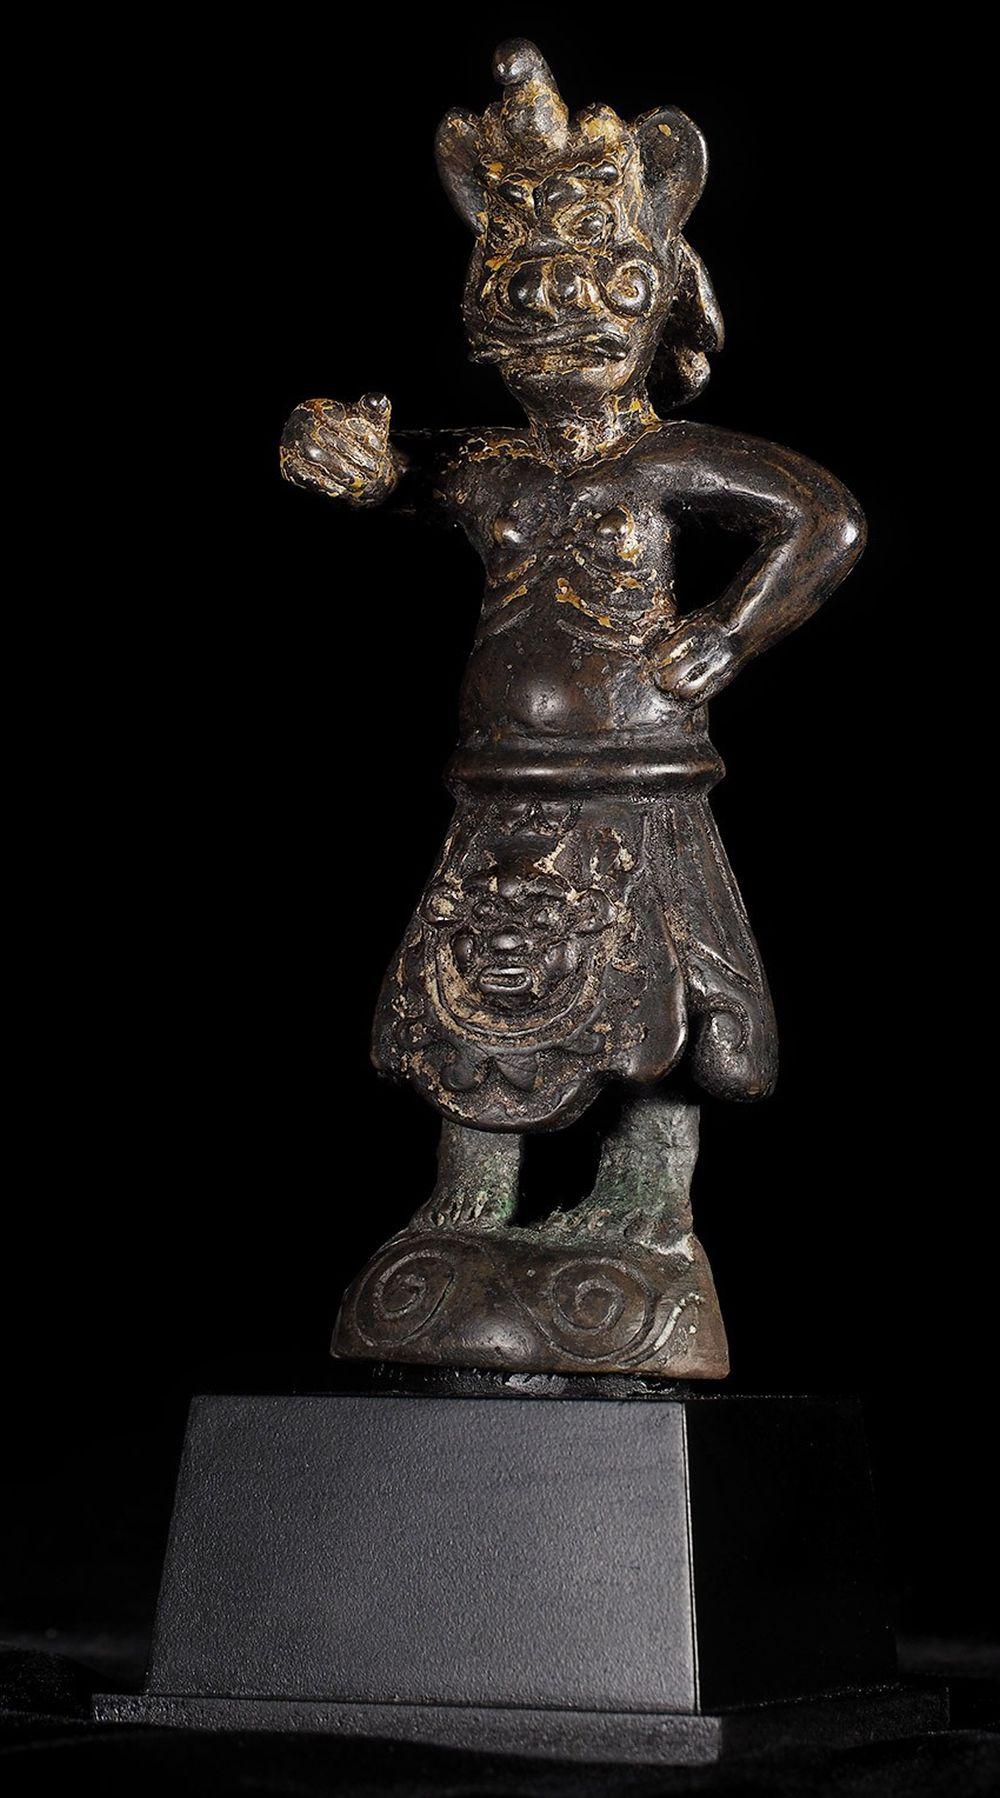 Cast 15thC or Earlier Chinese Guardian Figure - 9459 For Sale